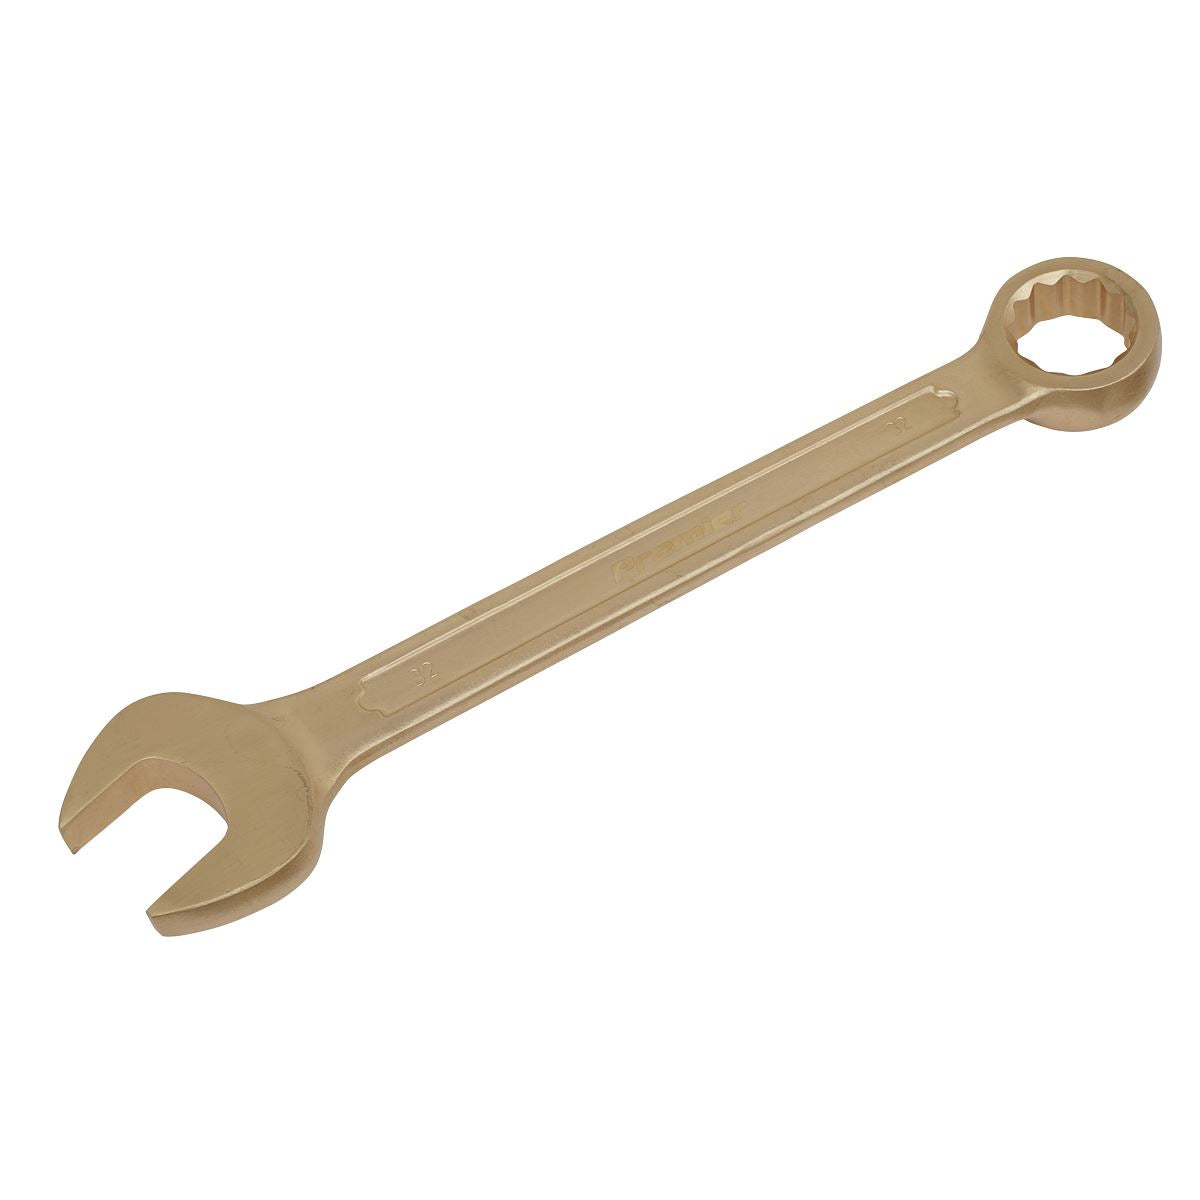 Sealey Premier Combination Spanner 32mm - Non-Sparking